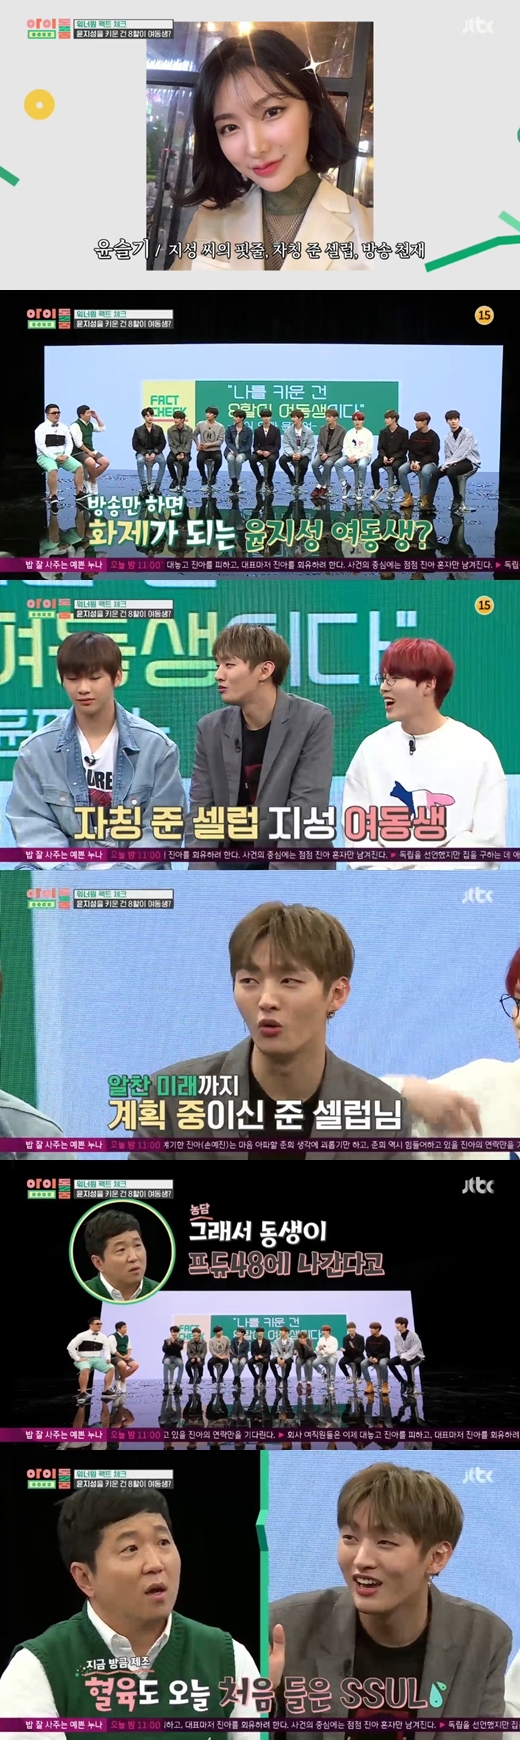 No, Daytime Emmy Award for Outstanding Talk Show Prepared.Group Wanna One Yoon Ji-sung reported on the current status of younger Sister.On the afternoon of the 12th, JTBCs new entertainment program Idol room appeared as a guest by group Wanna One.Younger sister of Yoon Ji-sung who collected big topic from Pro Deuce101 days.On this day, MC Jeong Hyeong-don asked, Is it right that 80,000 youngsters are raised now?Younger Sister these days calls himself Jun Celeb, and now he does not even go to the people, said Yoon Ji-sung.My brother is going to play in ProDeuce48. Does his brother have any intention of being an entertainer?I manufactured an instant rumor, but Yoon Ji-sung said, No.My brother is preparing for the Daytime Emmy Award for Outstanding Talk Show. Idol room is an idol entertainment program newly introduced by Idol professional MC Jeong Hyeong-don and Defcon.